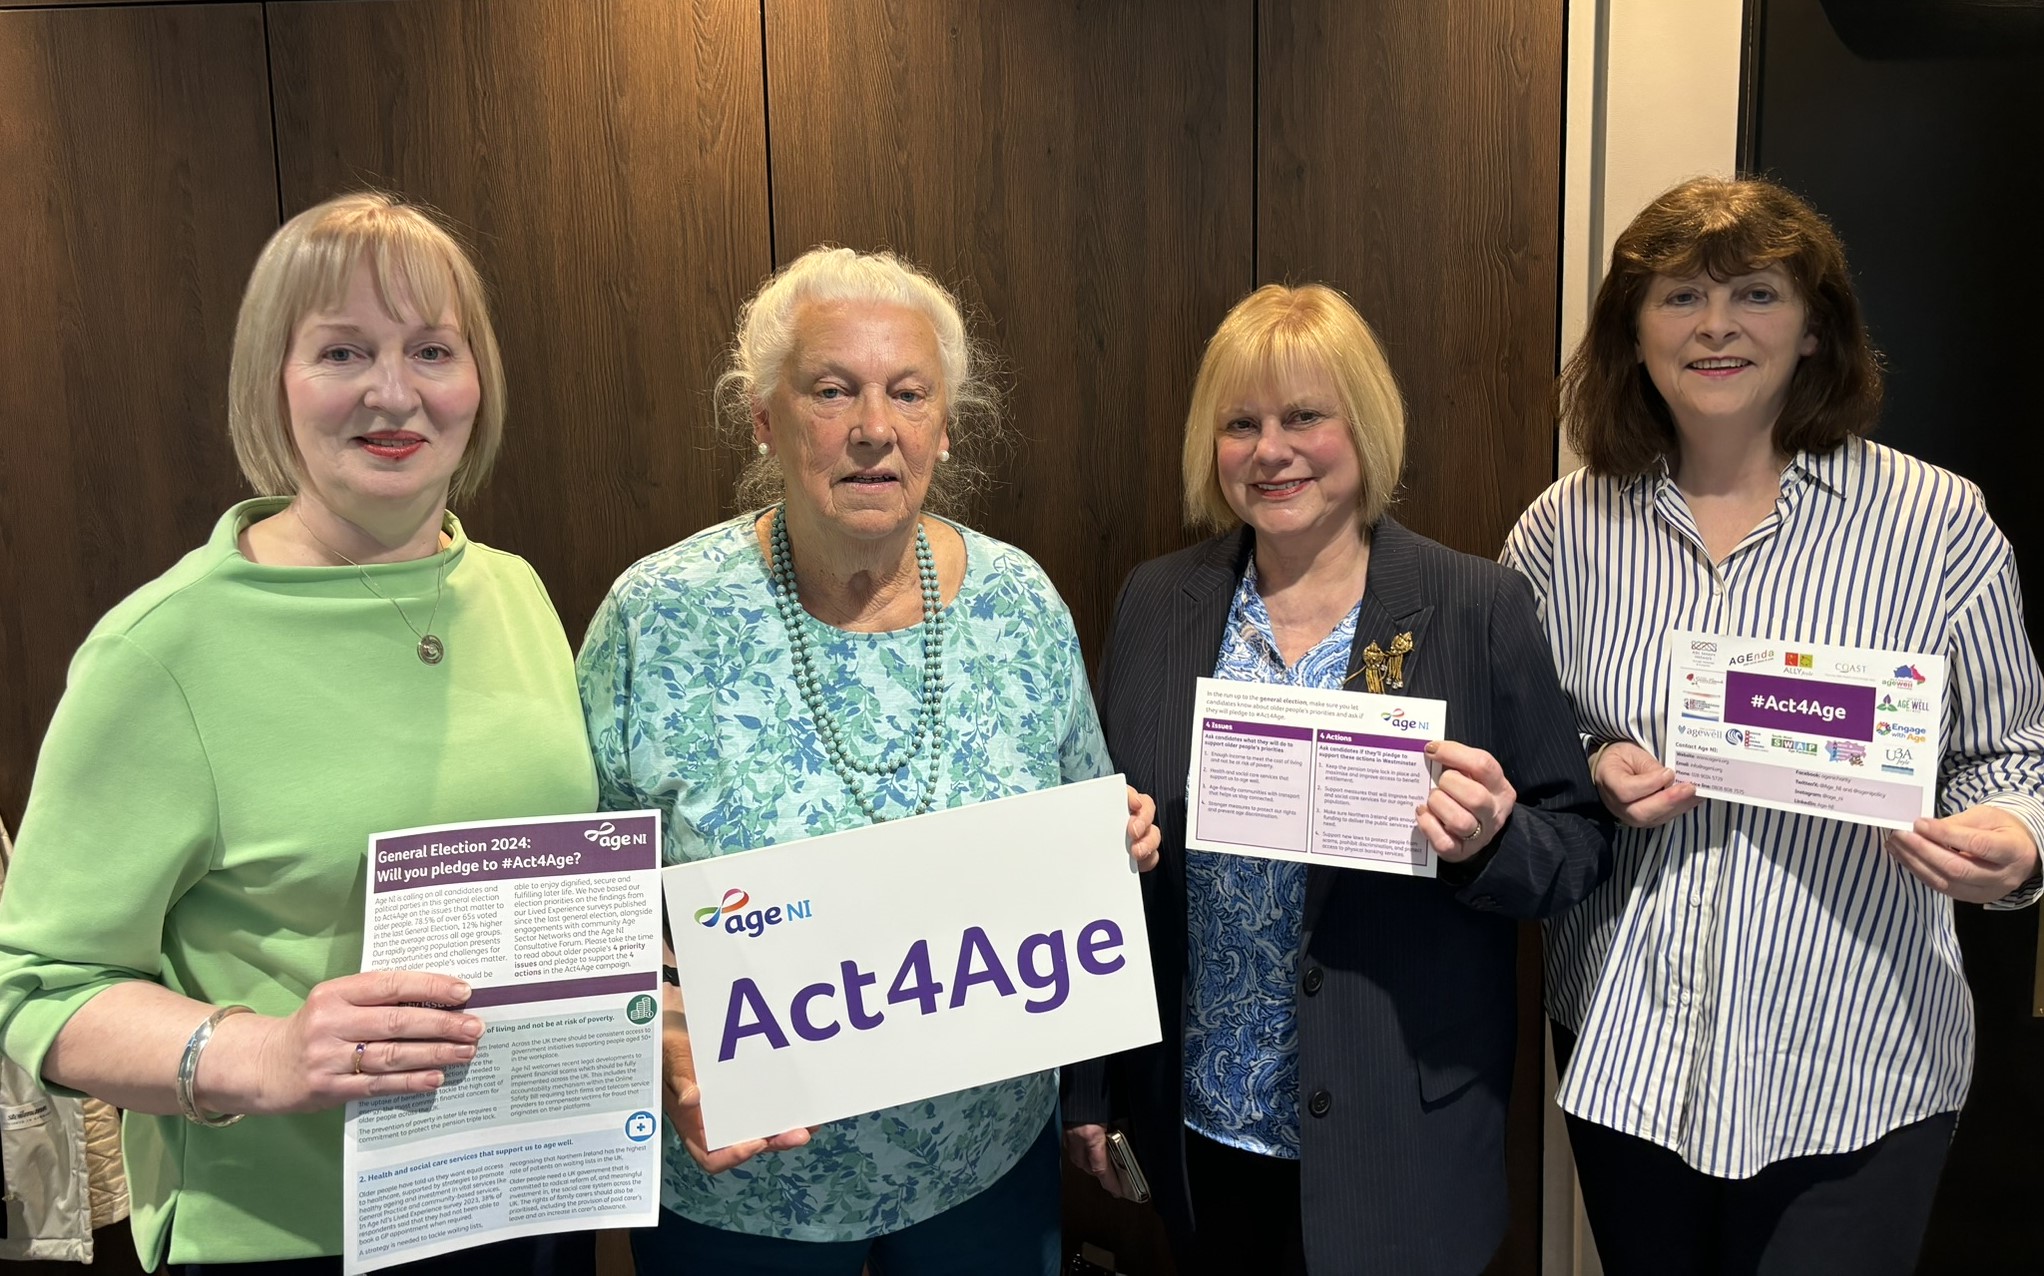 Wilma Stewart, Co Vice-Chair, Age NI’s Consultative Forum; Ann Murray, Chair, Age NI’s Consultative Forum; Anne Murray, Co Vice-Chair, Age NI’s Consultative Forum; Paschal McKeown, Charity Director Age NI holding Act4Age placard